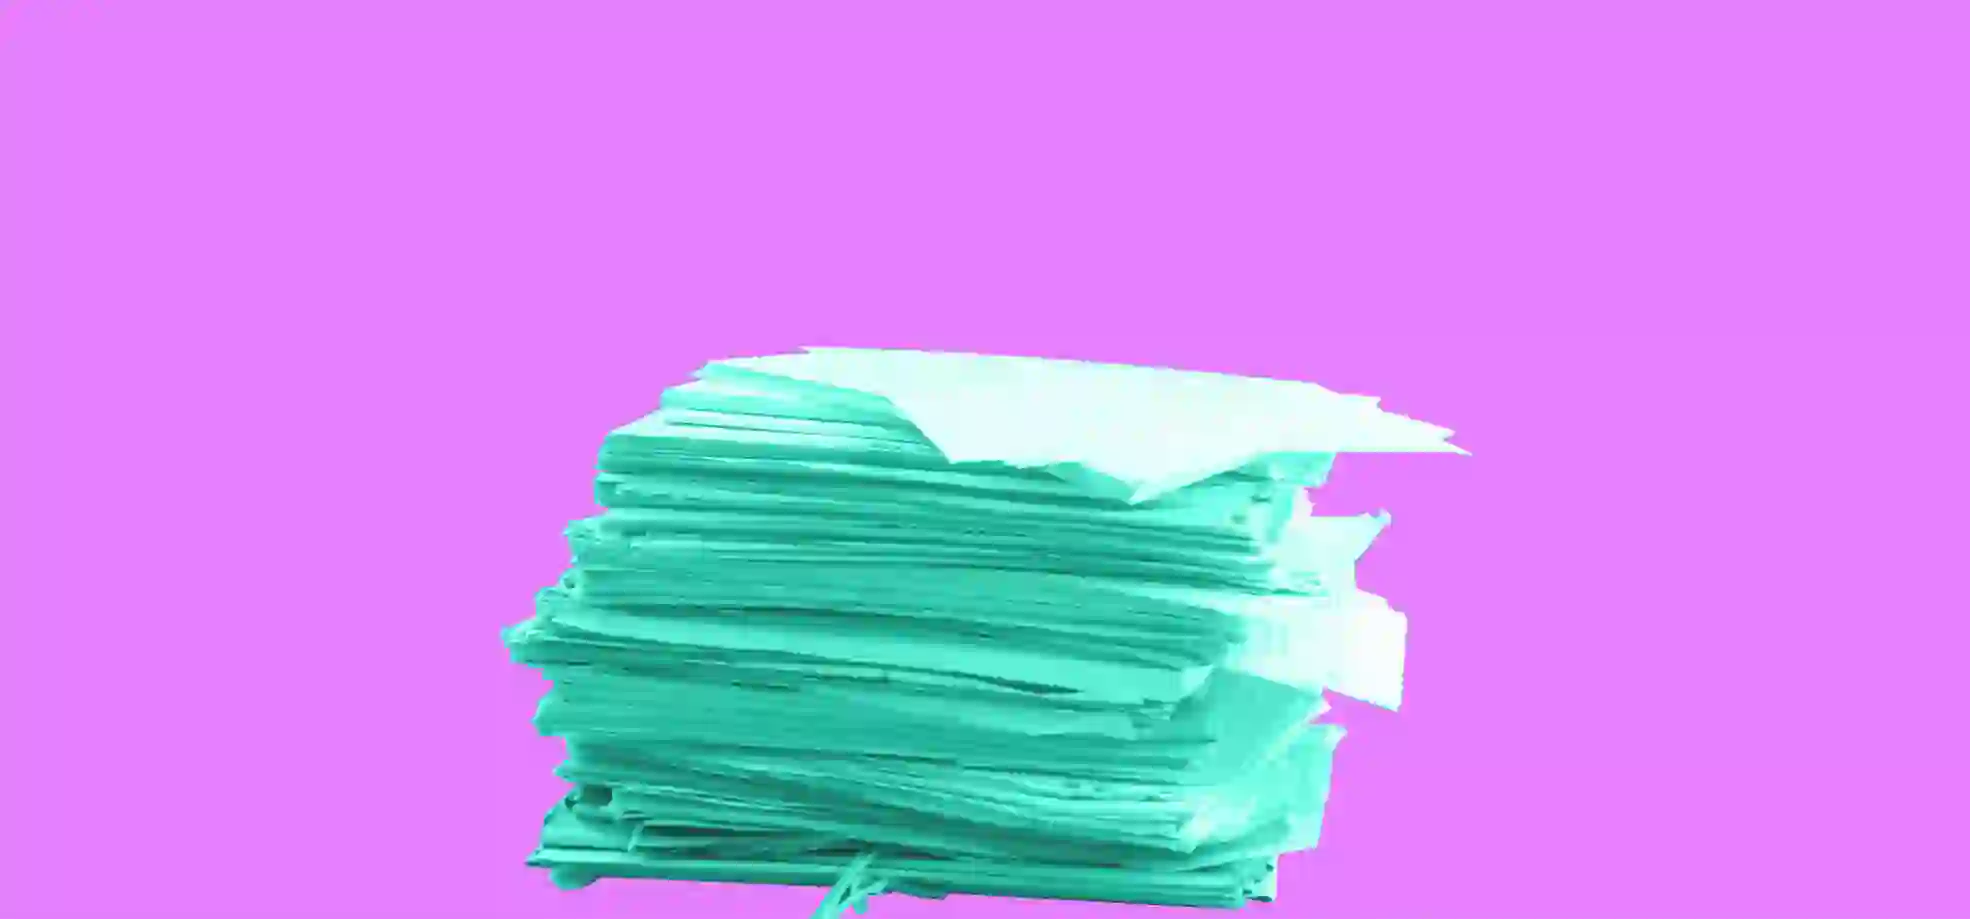 pile of papers on purple background